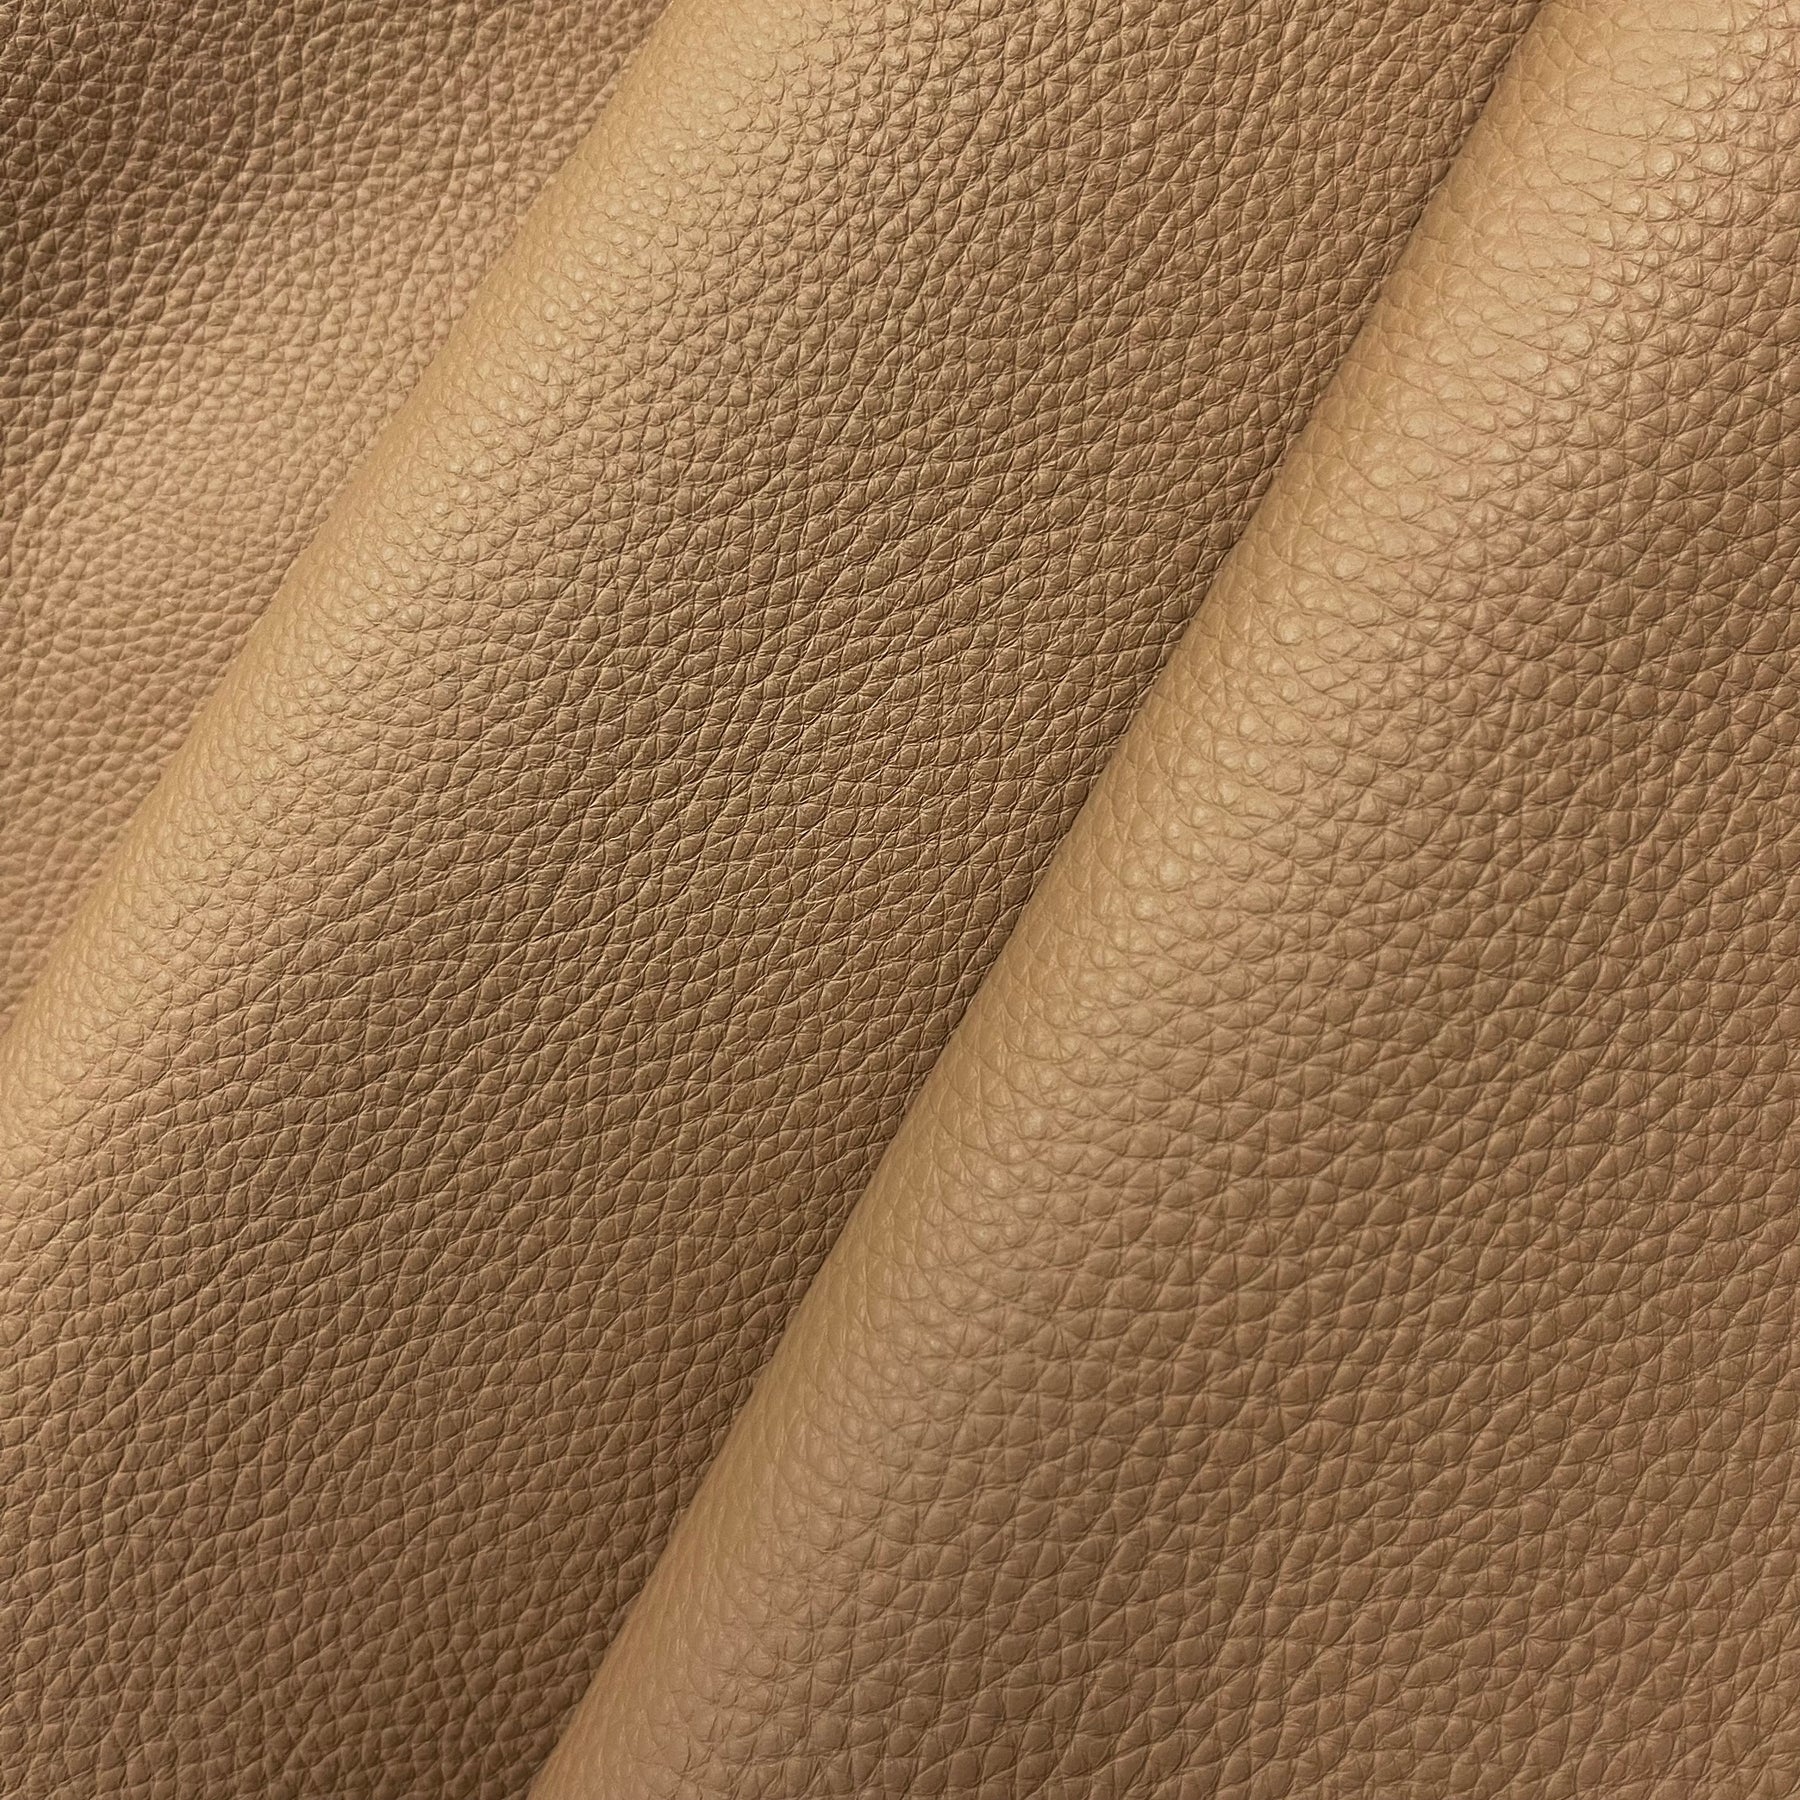 Dark Olive Green Vegan Leather Fabric for Upholstery Faux Leather in Cow  Skin Pattern Matte Finish 